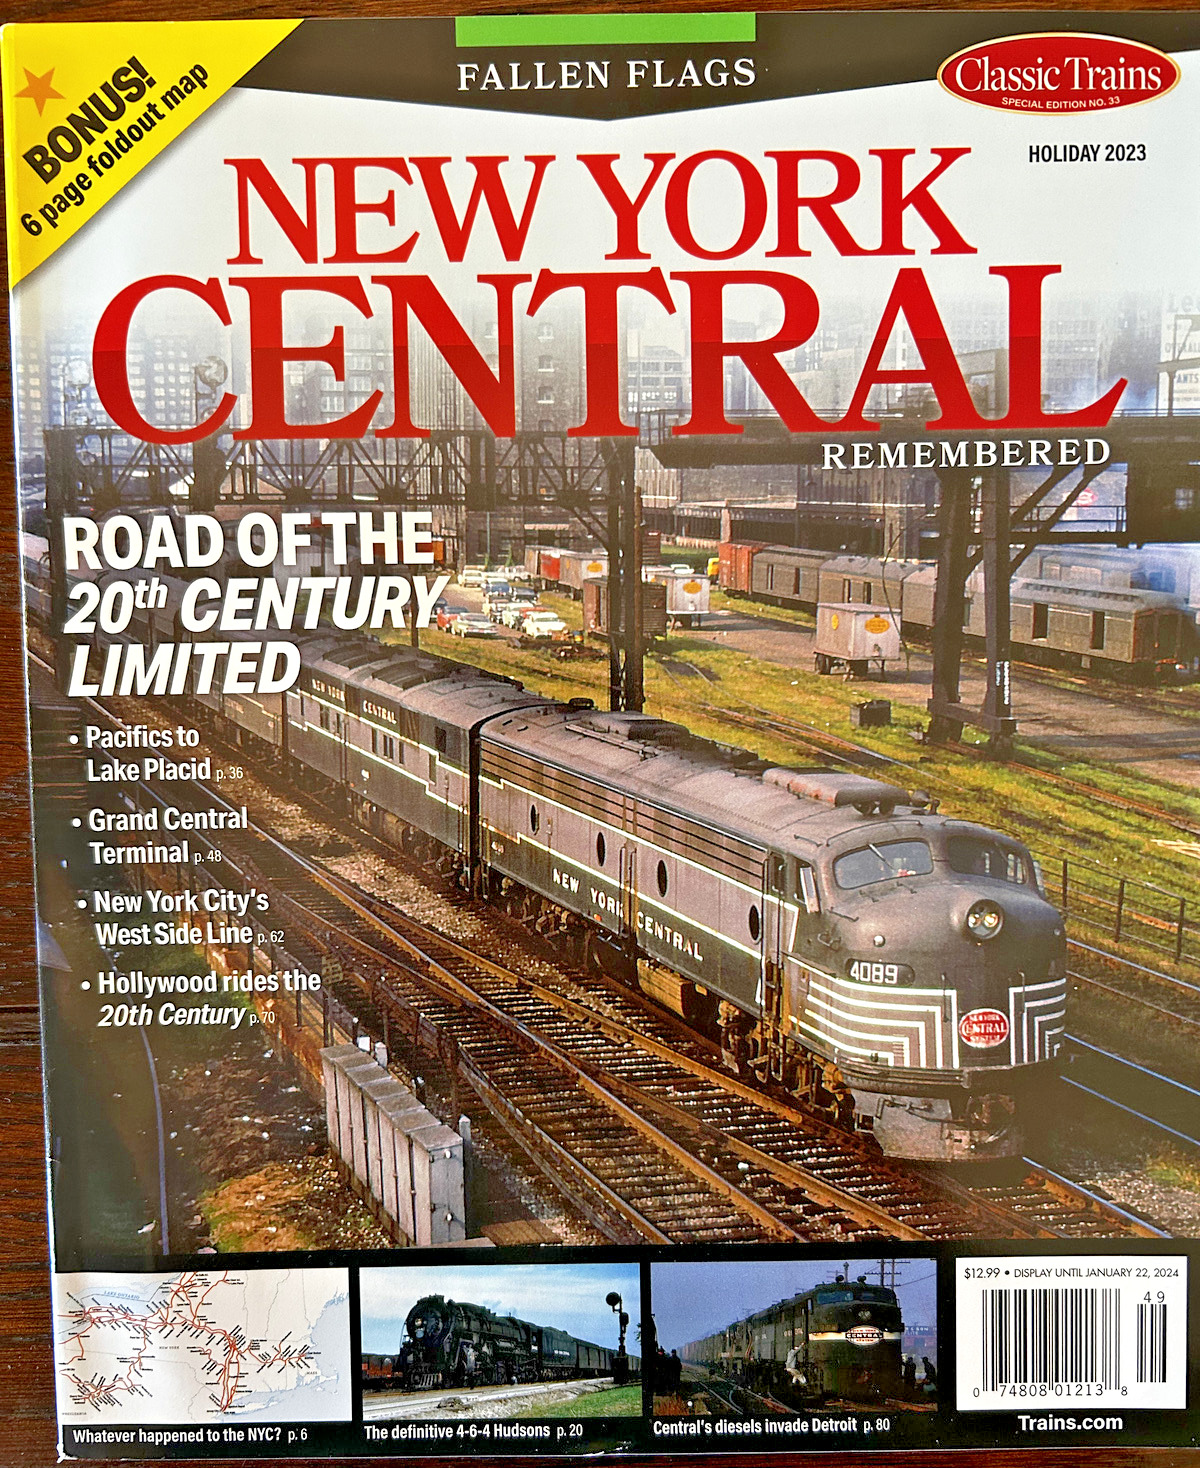 New York Central Remembered -- Classic Trains Special \'Fallen Flags\' issue